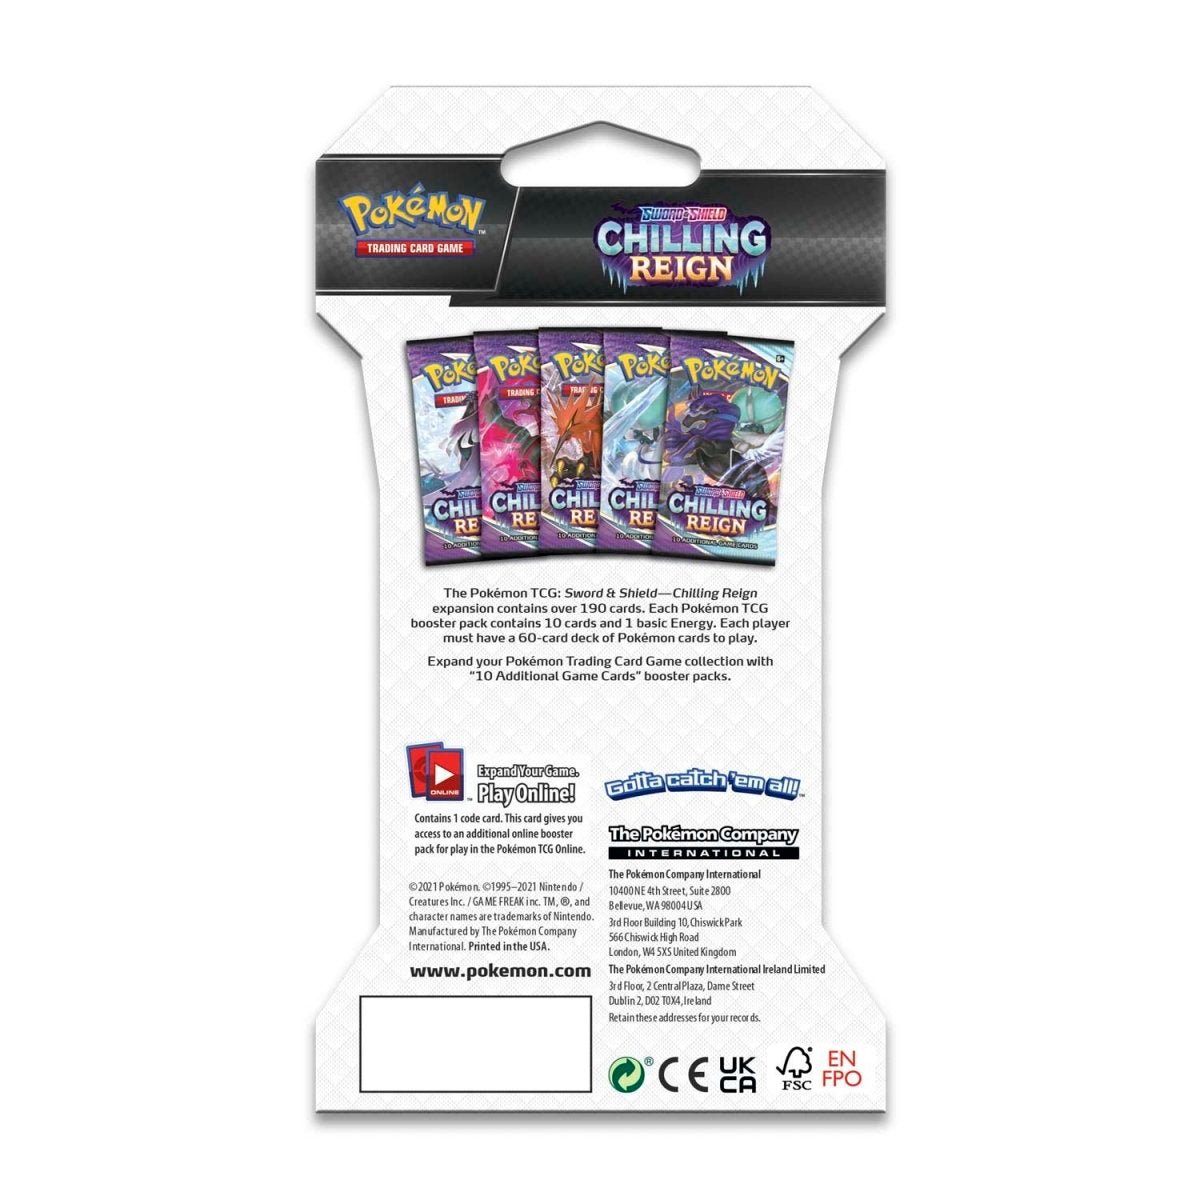 Pokémon: Sword & Shield - Chilling Reign Sleeved Booster Pack - PokeRvmbooster pack